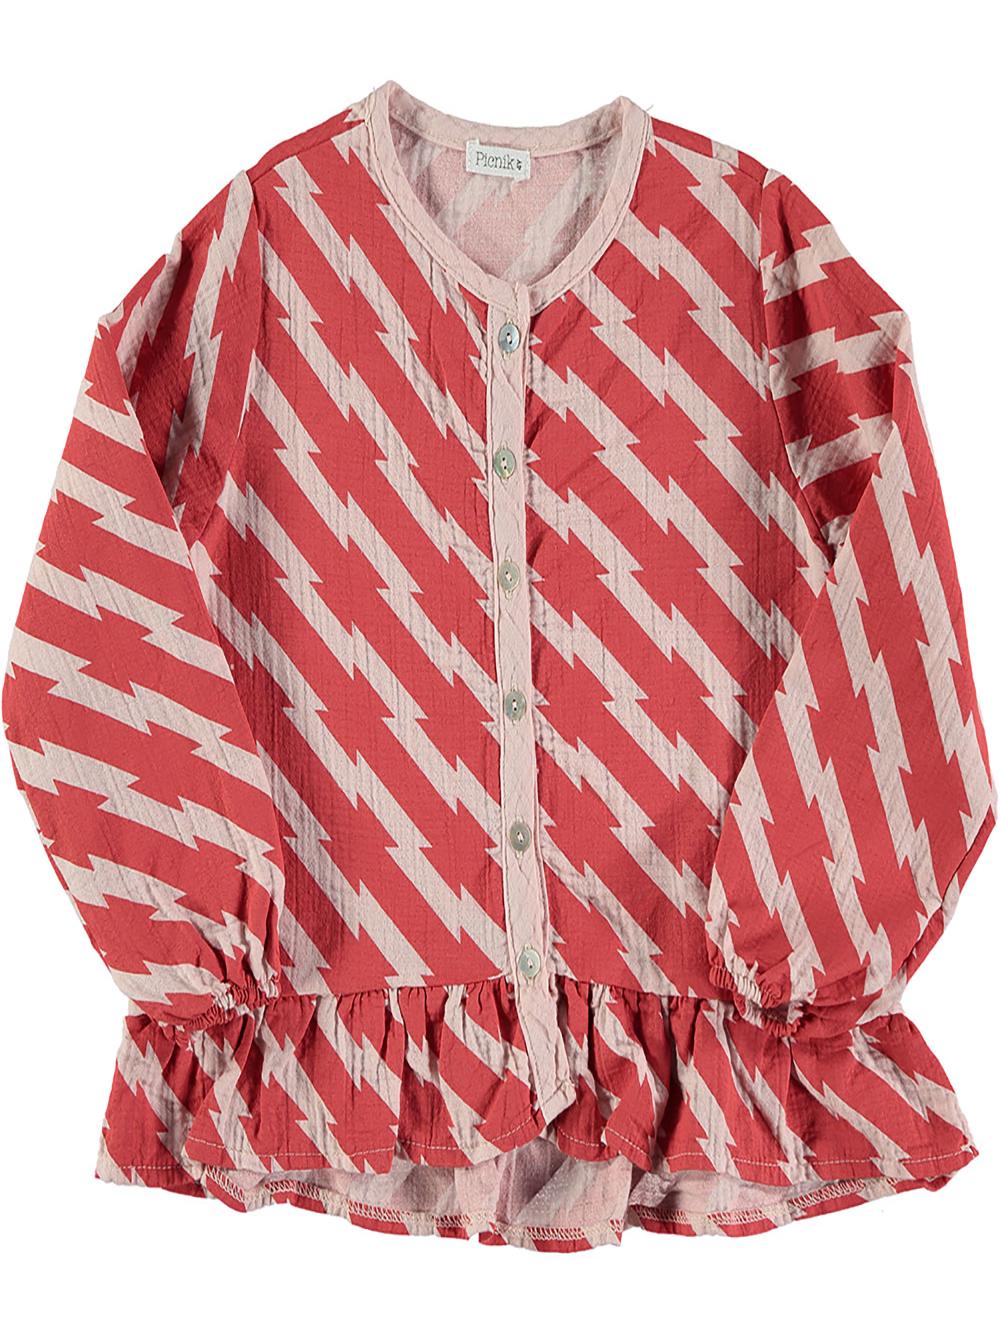 PINK RUFFLED SHIRT WITH RED STRIPES PRINT